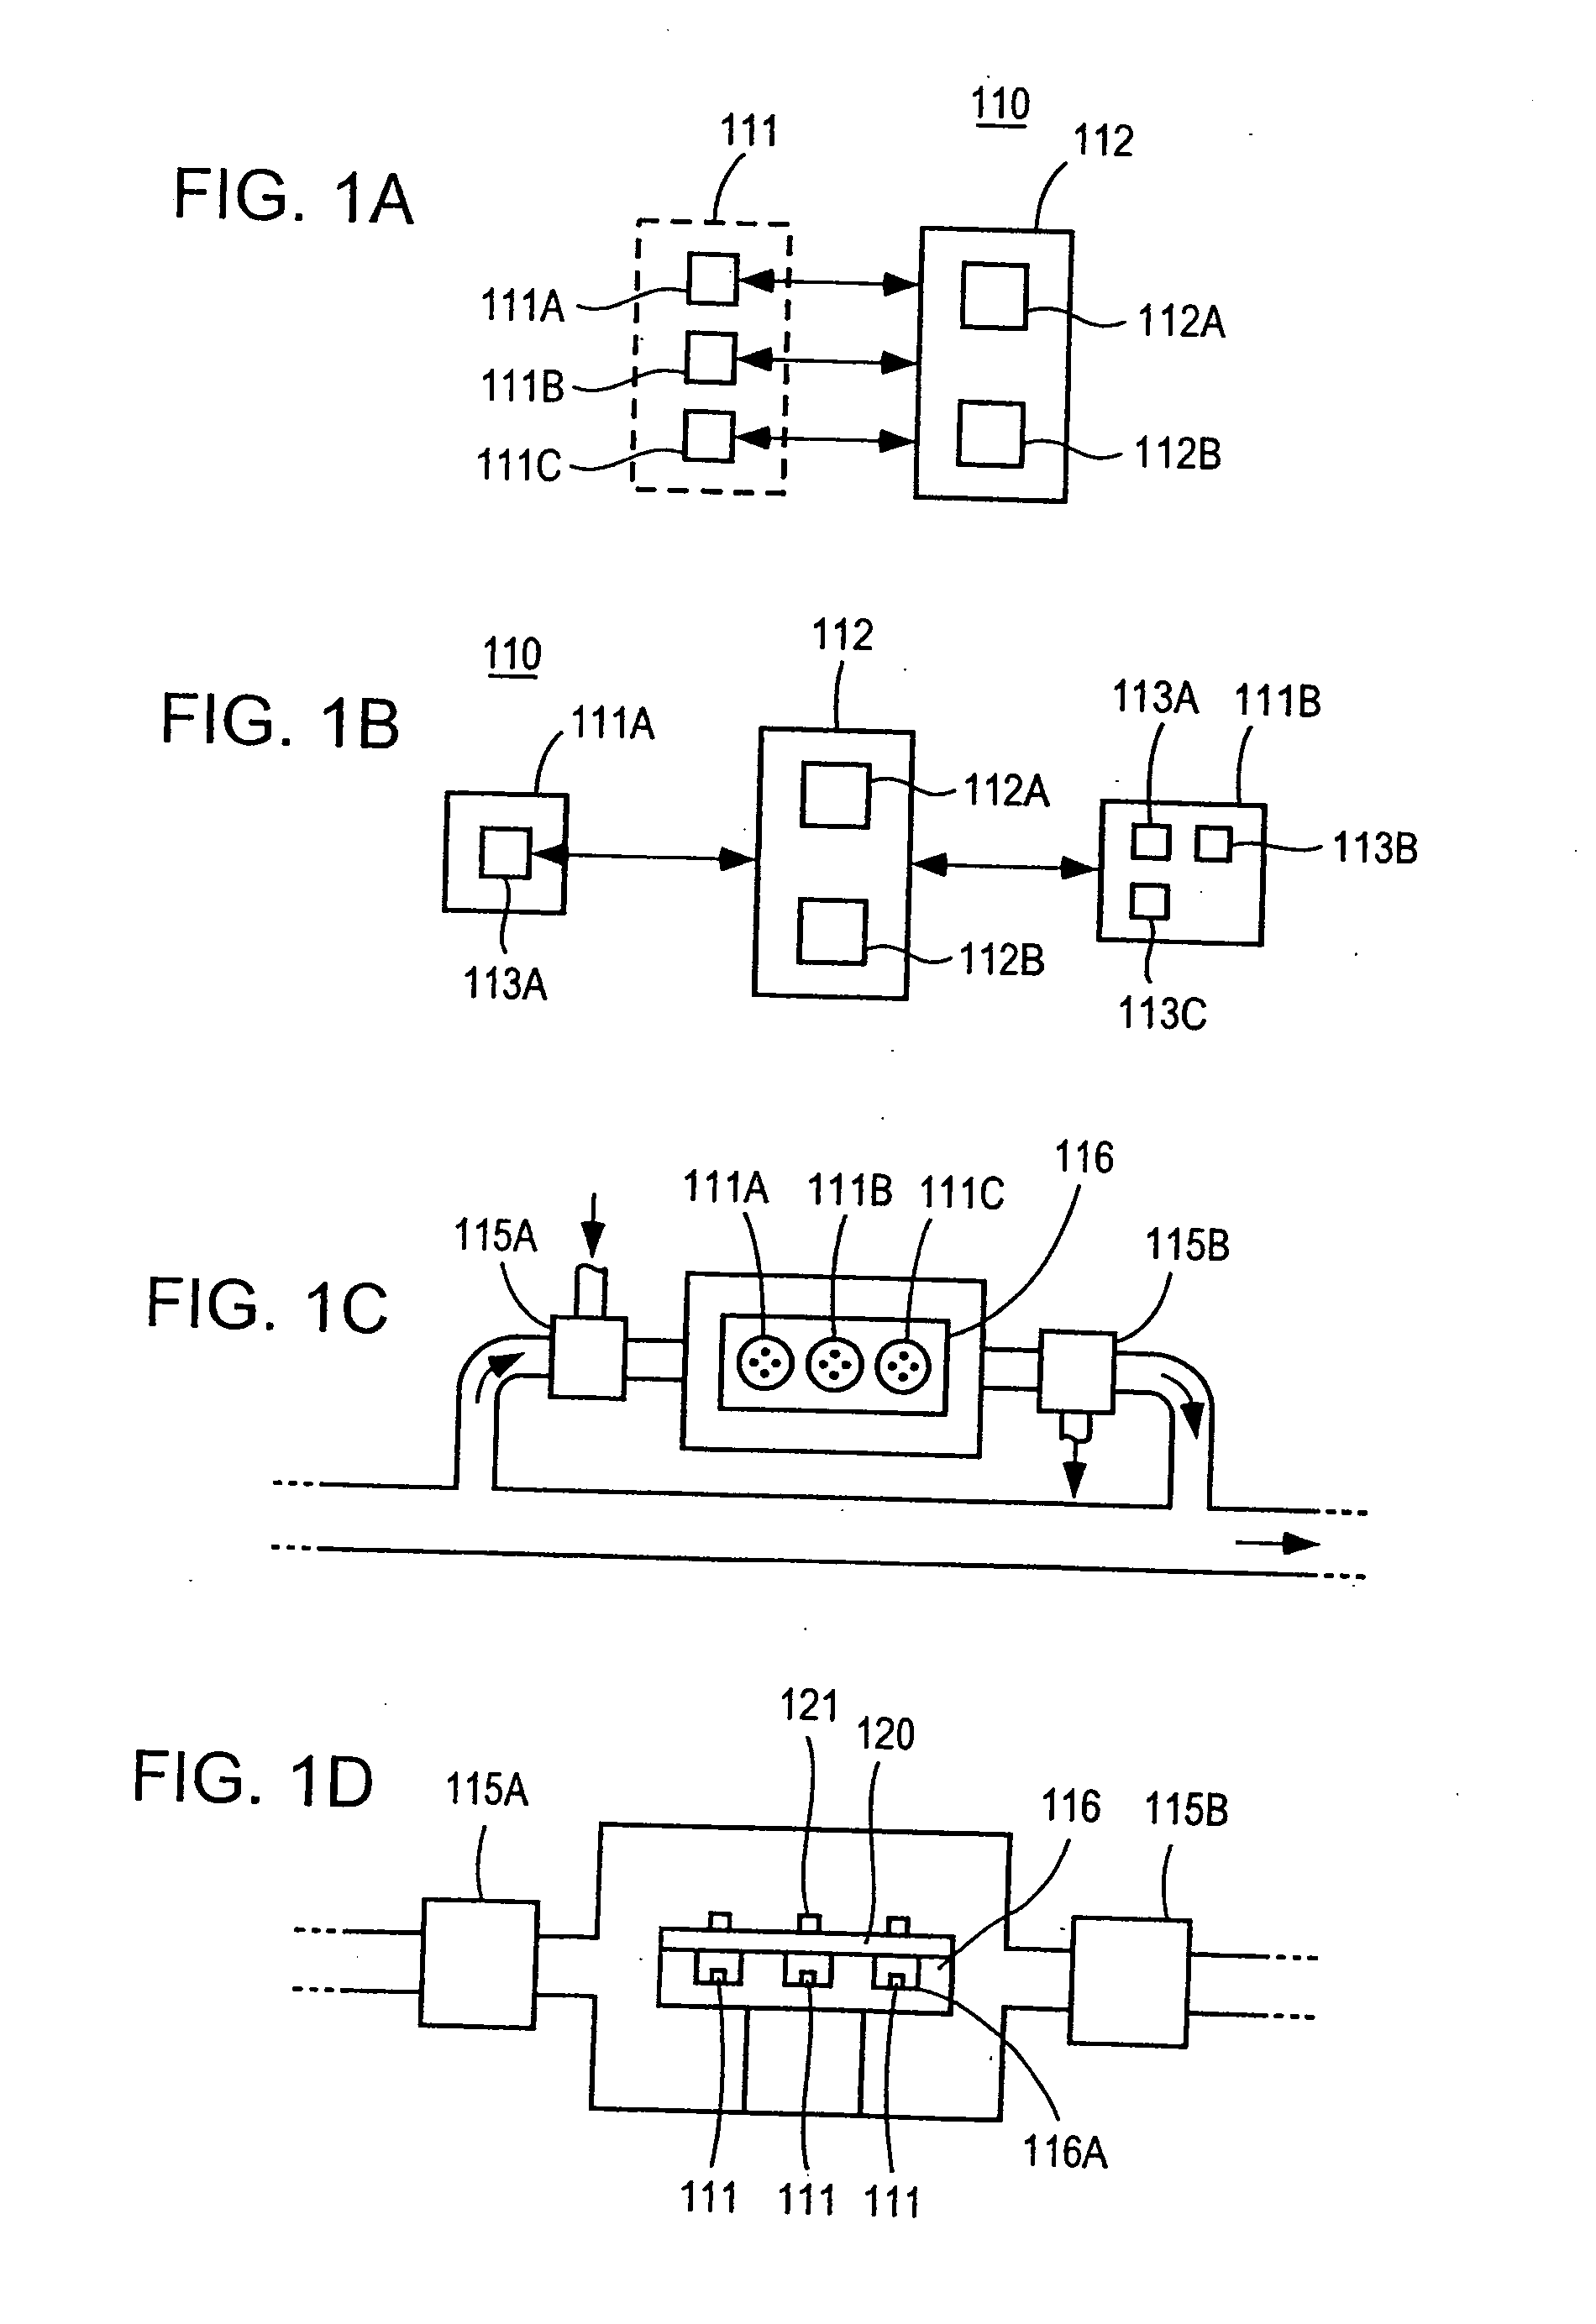 System and methods for fluid quality sensing, data sharing and data visualization